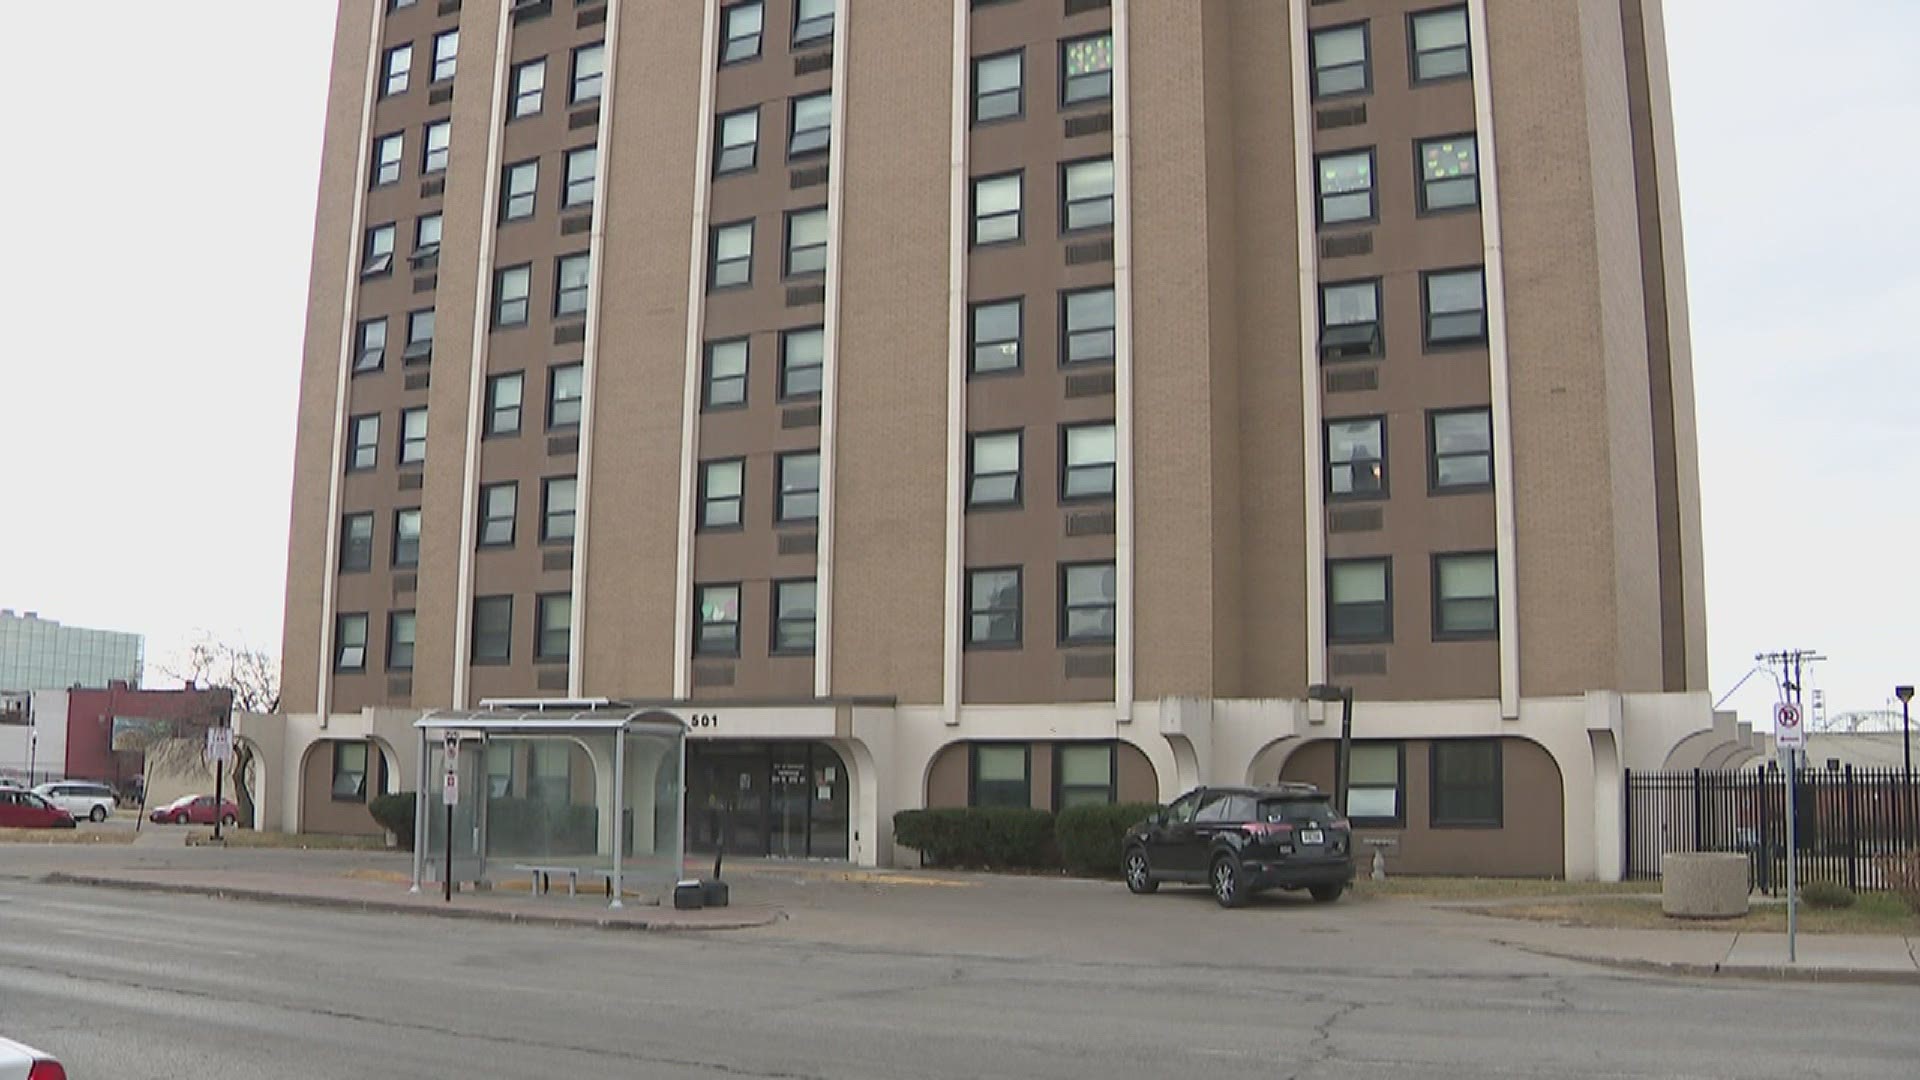 A task force recommended that the city divert the money from the sale of the high-rise apartment building to three major public initiatives.